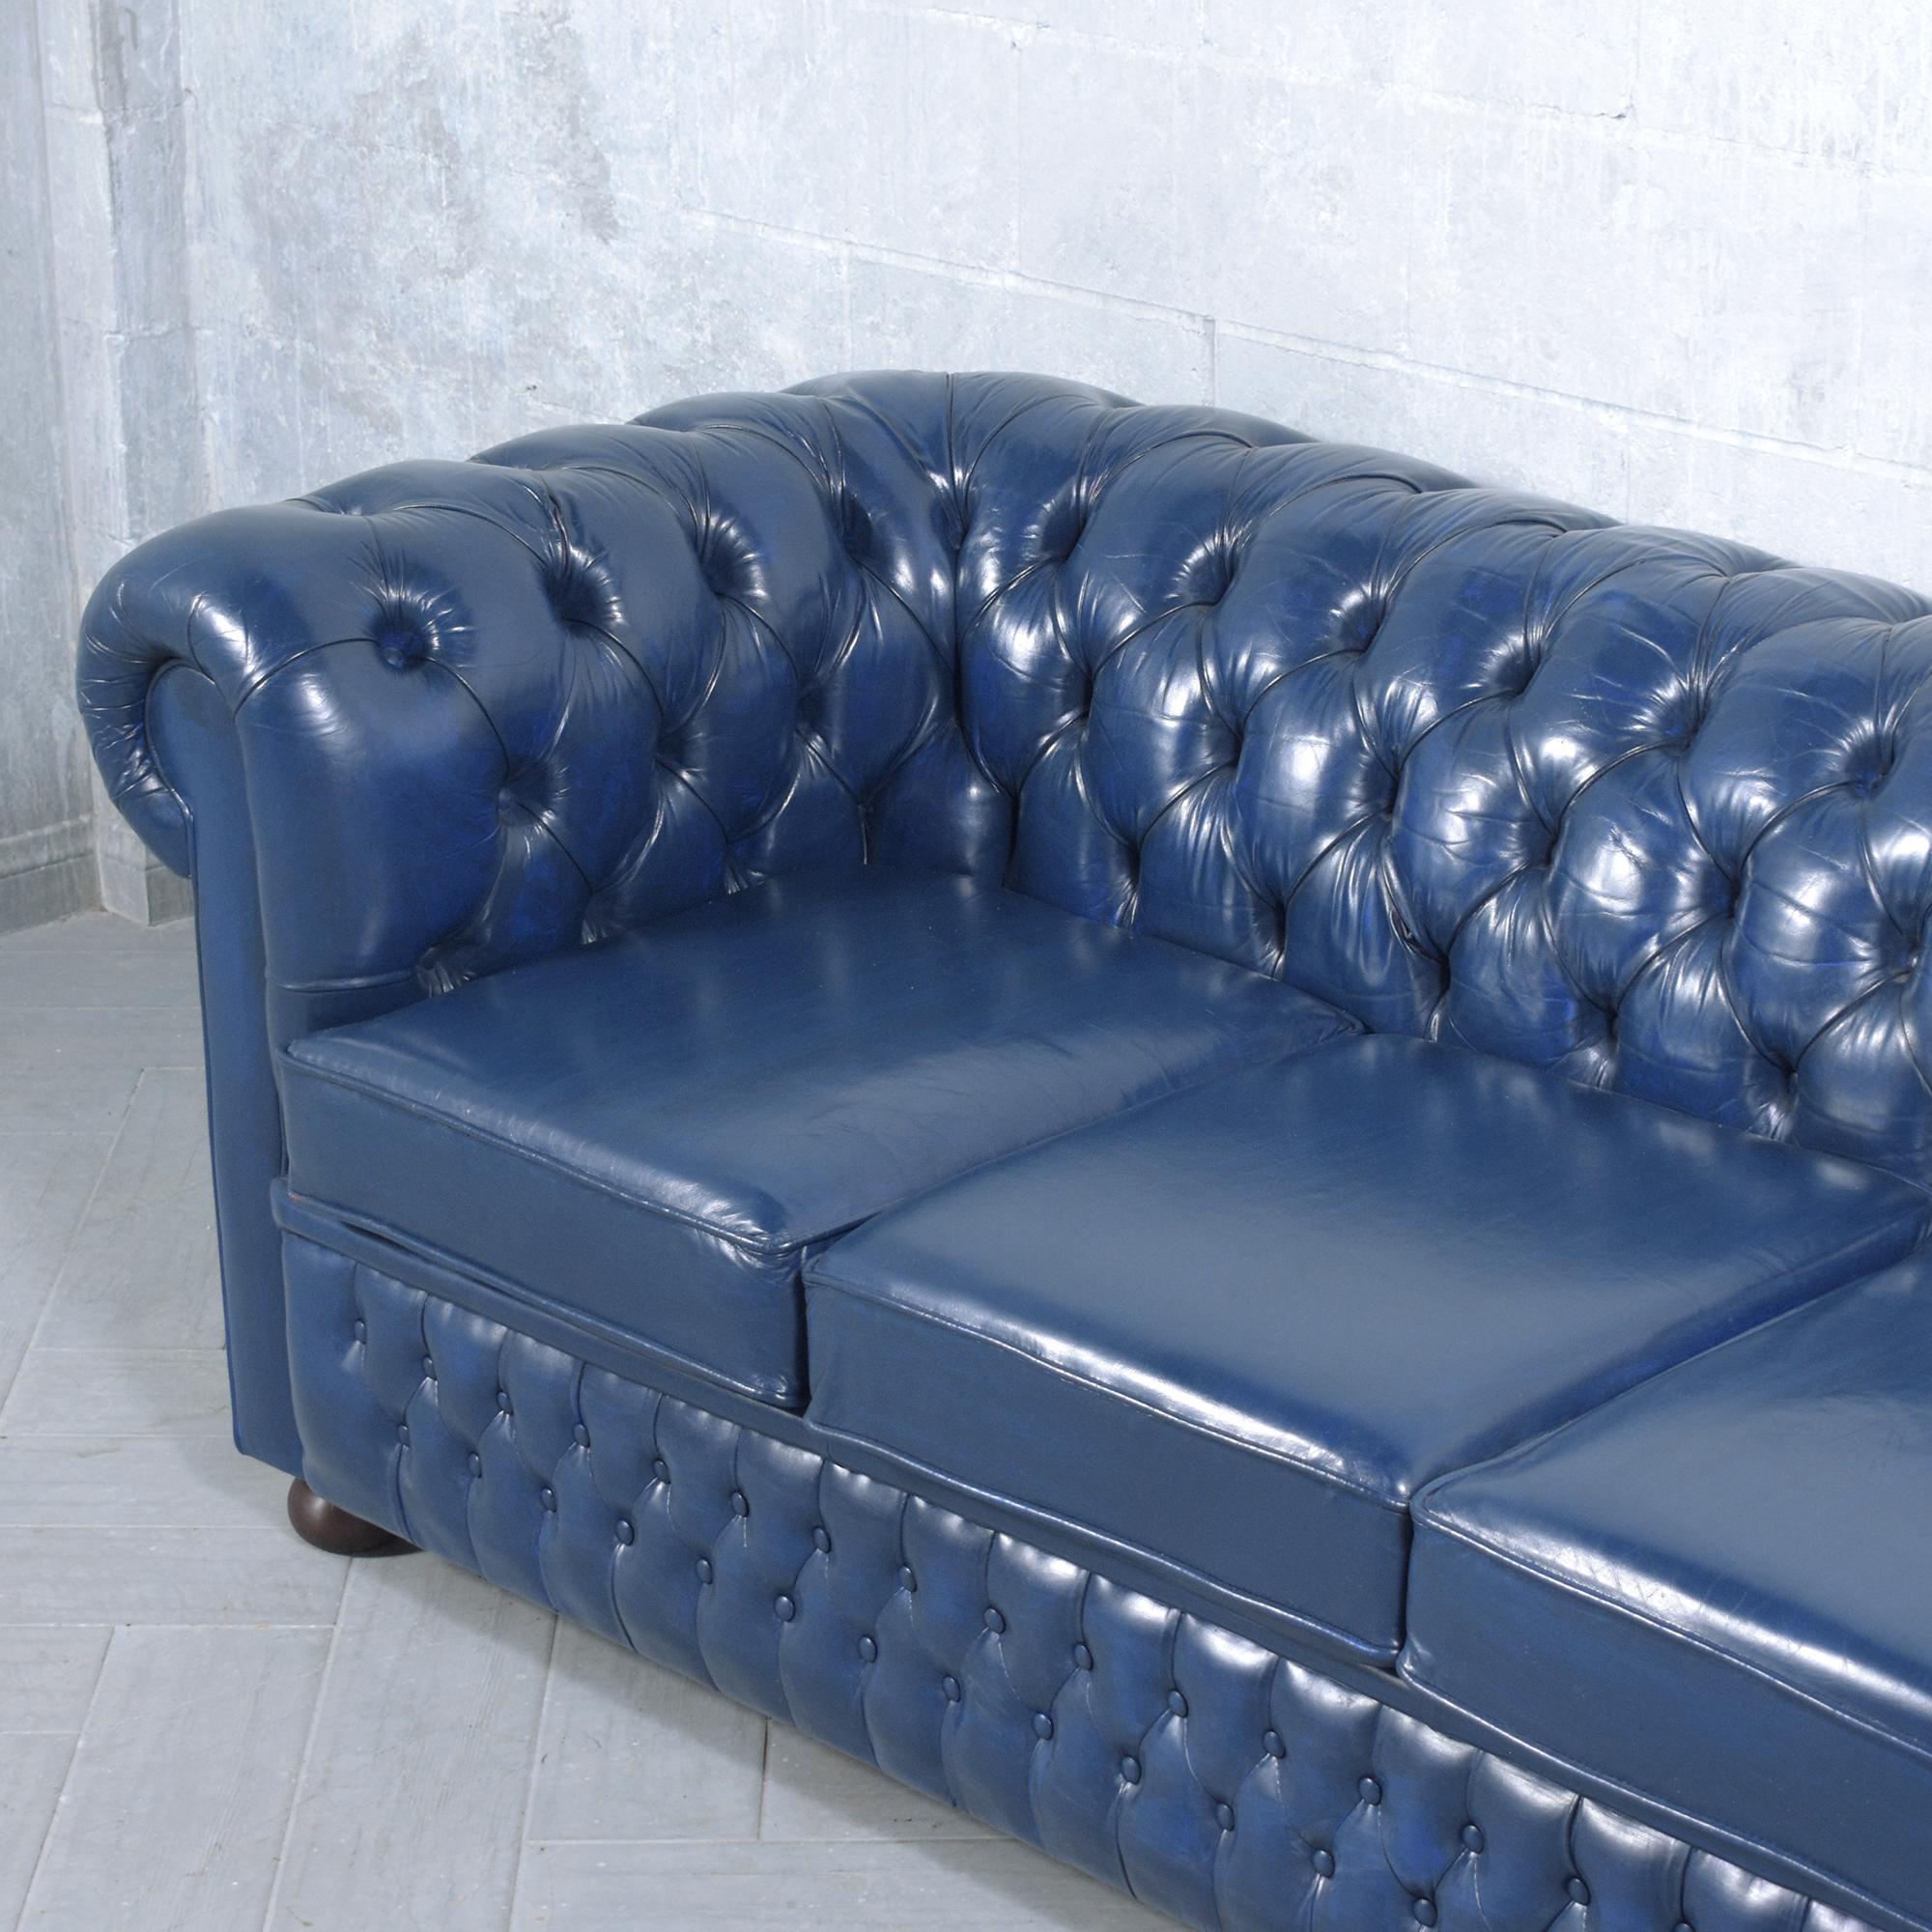 Dyed Restored Vintage Chesterfield Sofa in Distressed Navy Leather For Sale